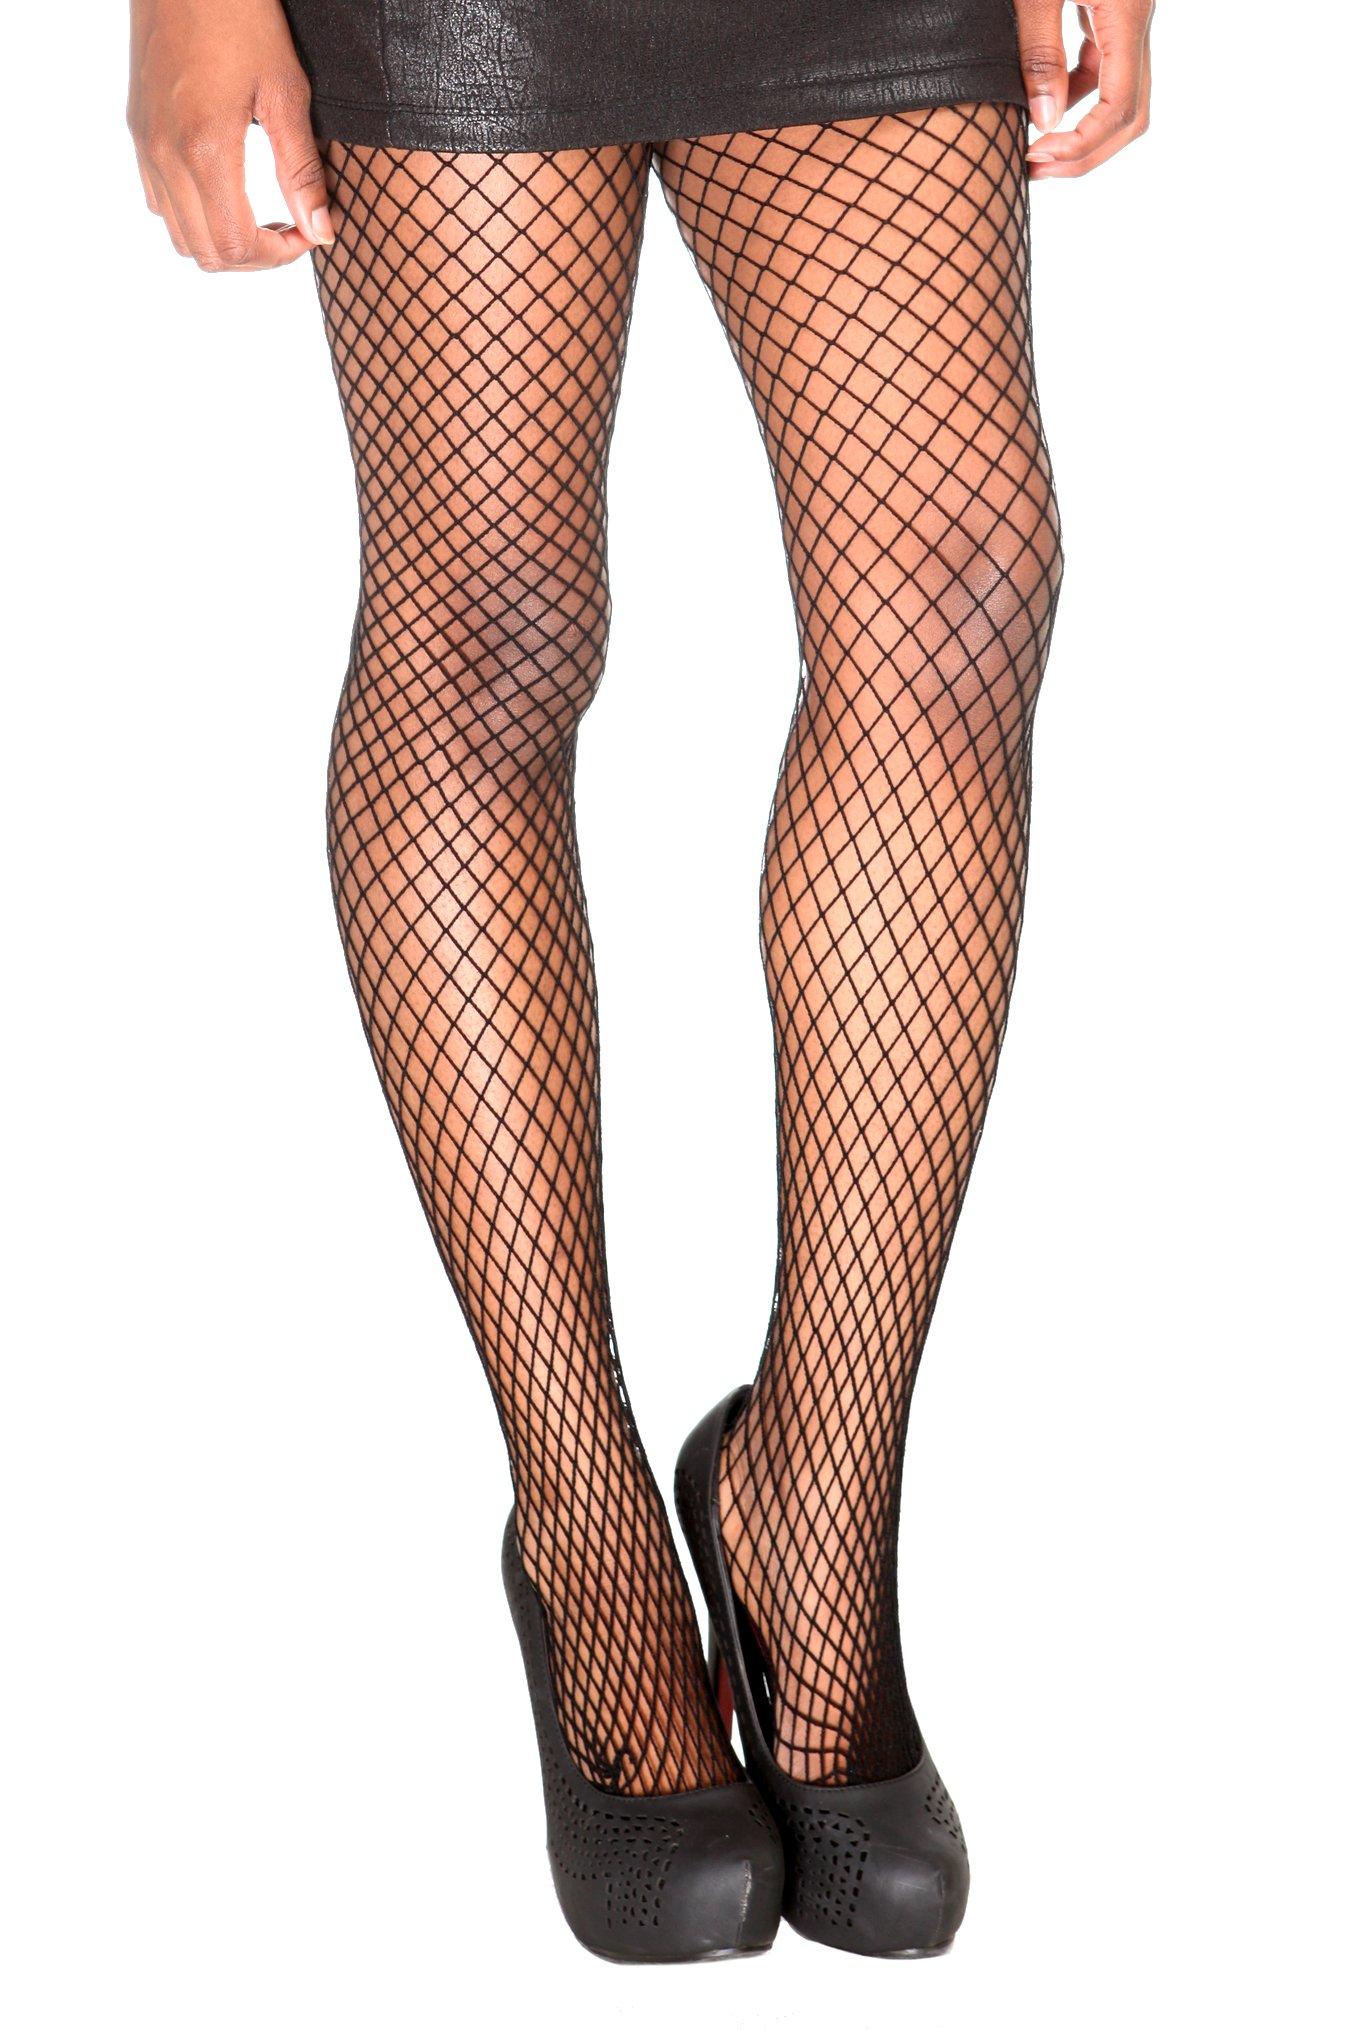 HOT TOPIC PLUS XL SIZE BLACK MEDIUM FISHNET FOOTED TIGHTS PANTYHOSE NEW IN  BAG